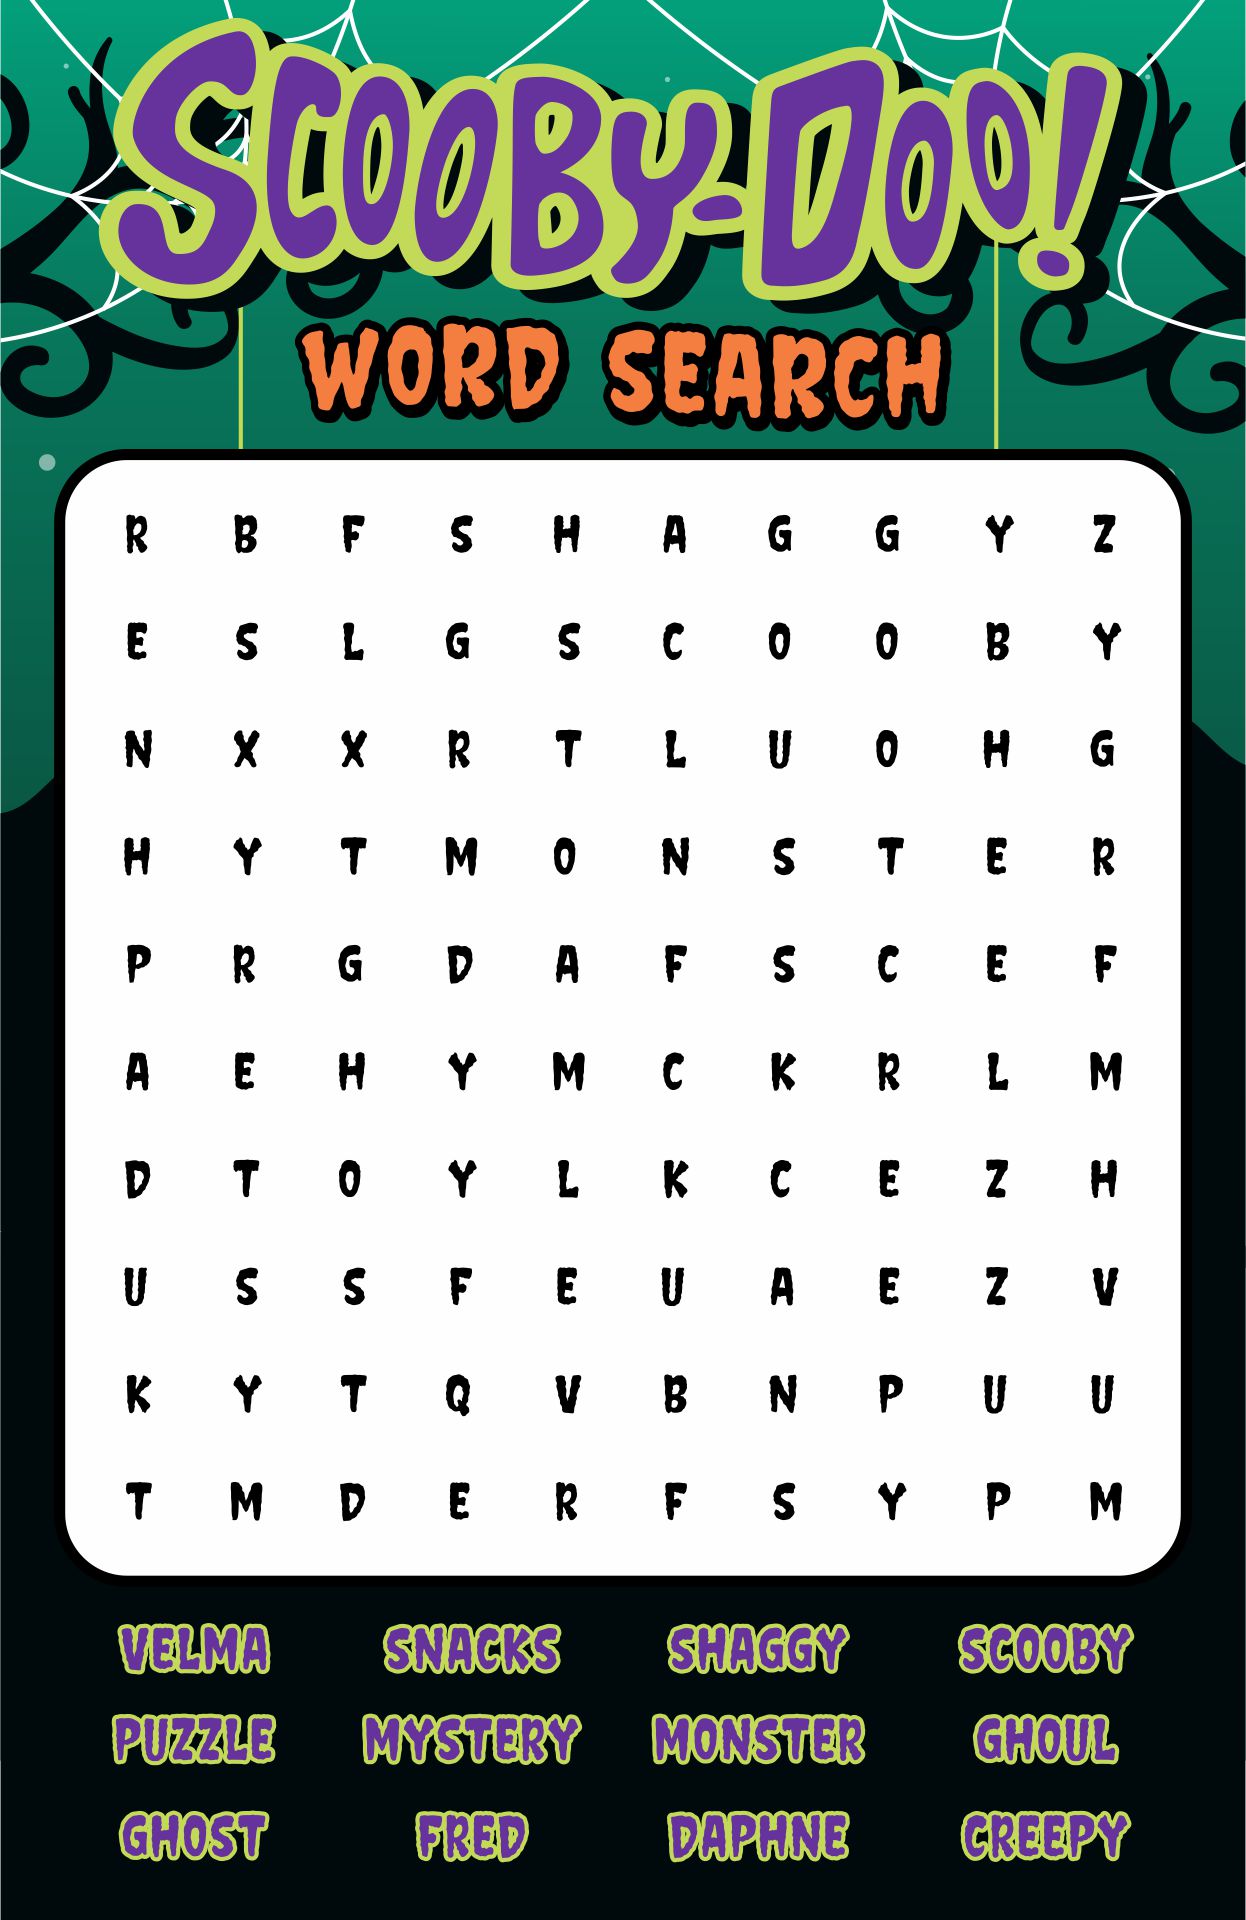 Scooby Doo Word Searches